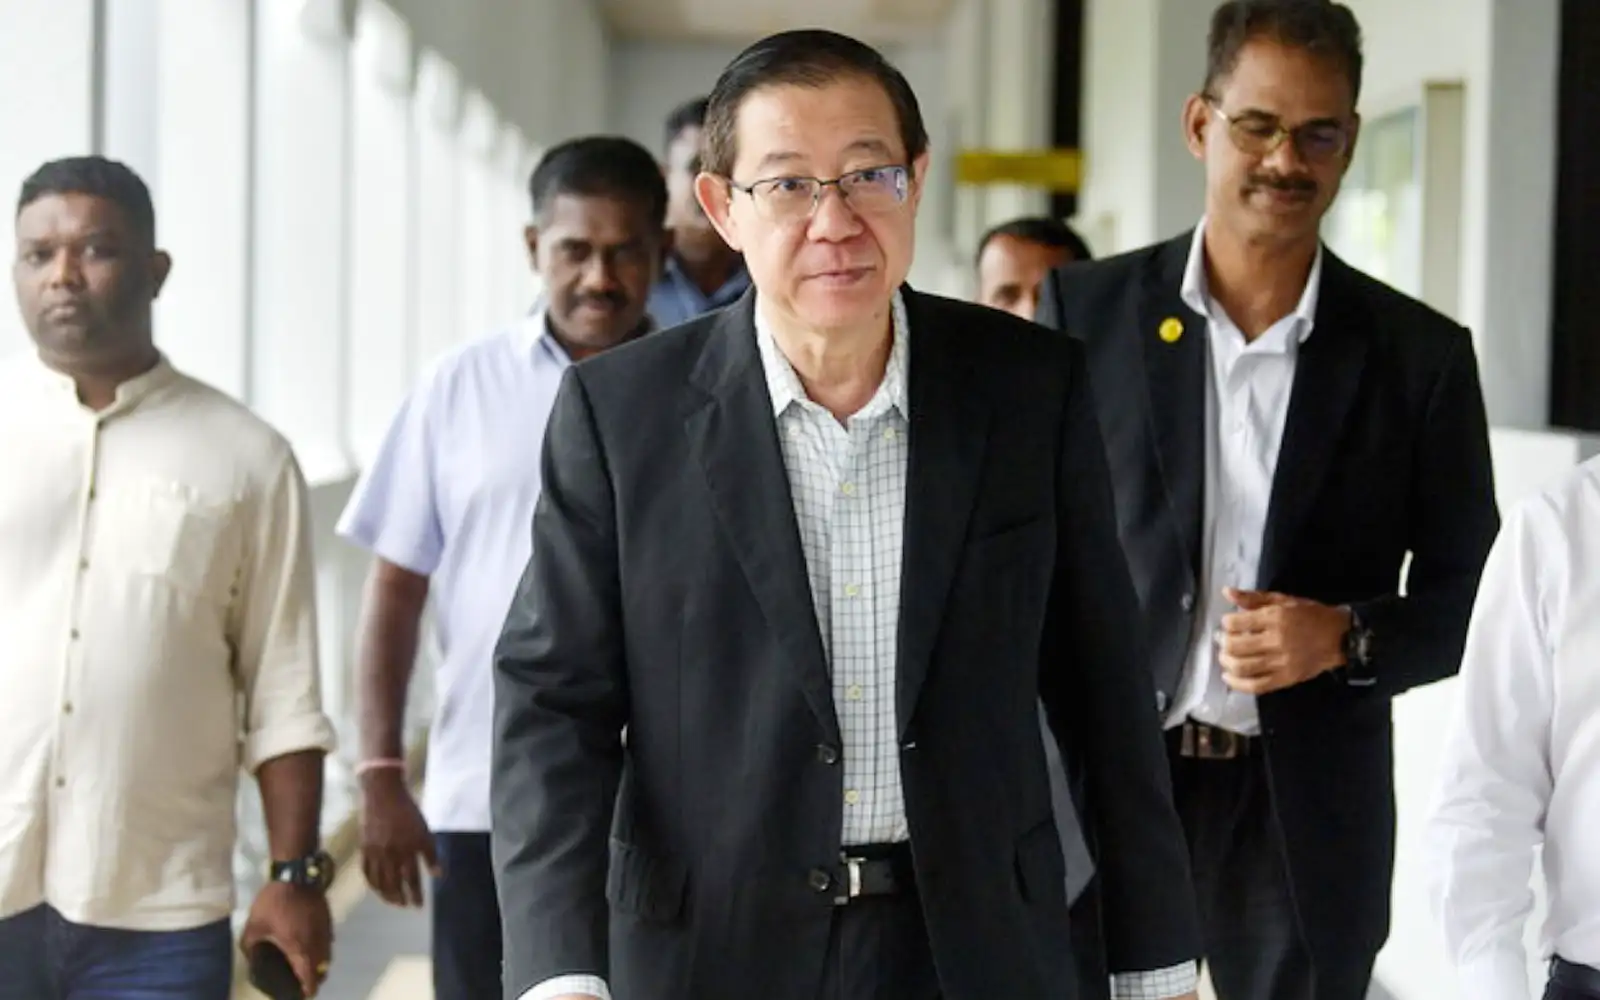 macc commenced special probe against guan eng in 2018, court hears